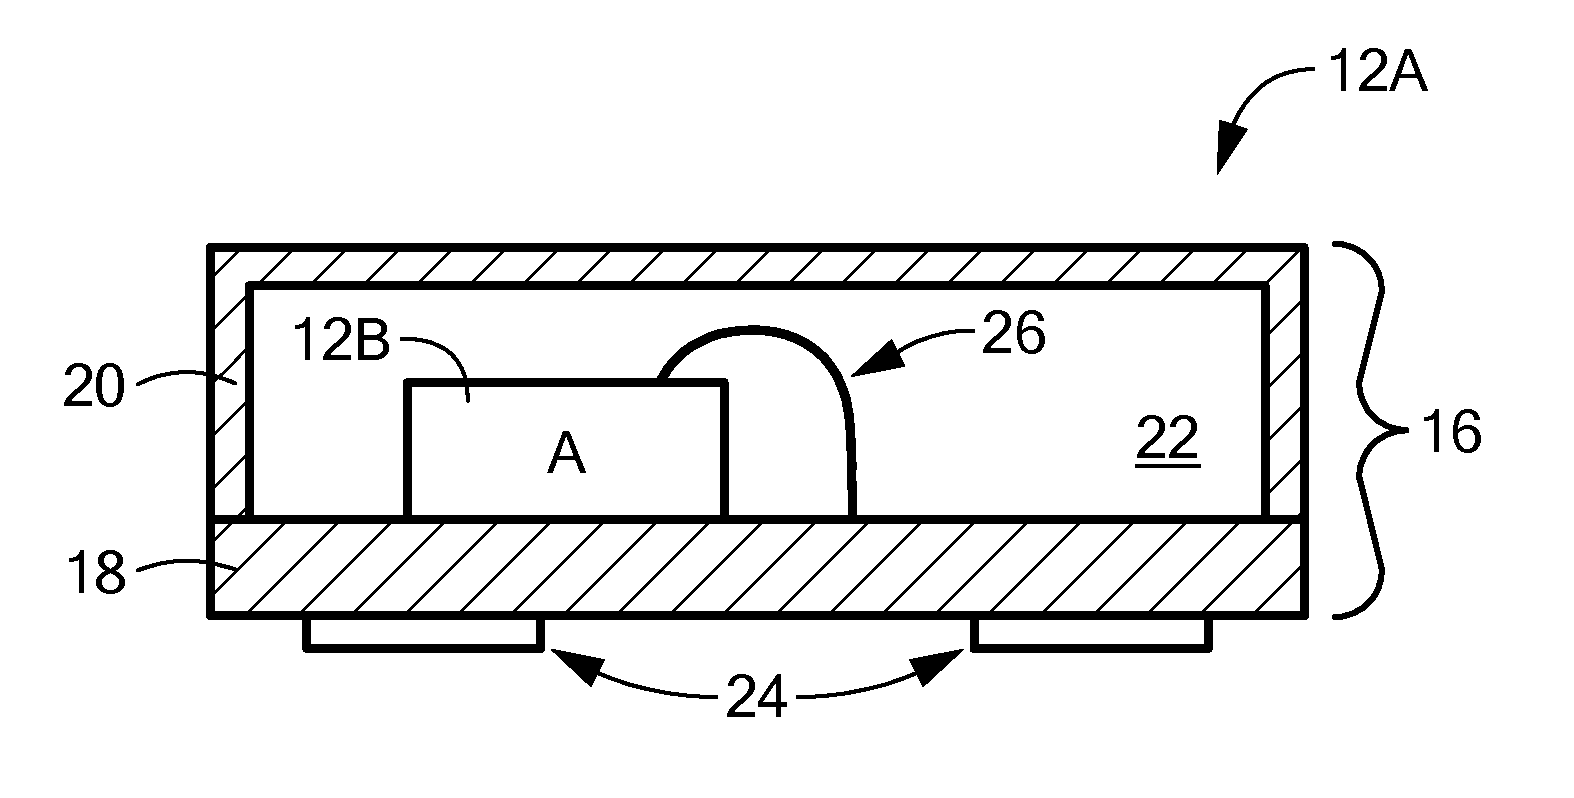 Accelerometer with Offset Compensation